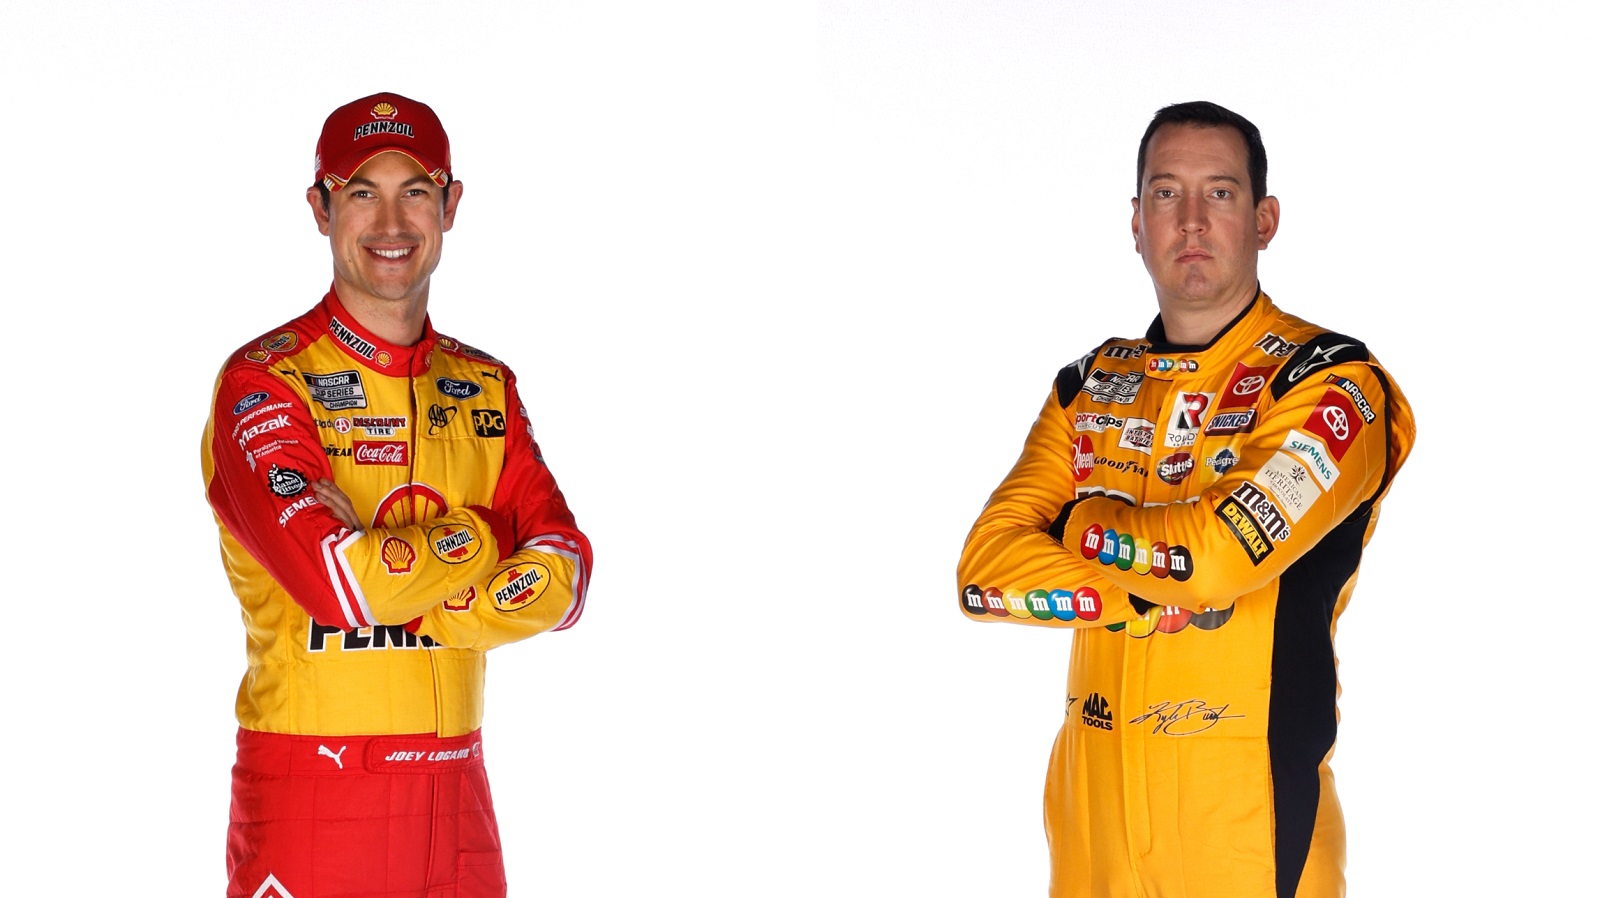 Two-time NASCAR Cup Series champions Joey Logano and Kyle Busch. | Getty Images